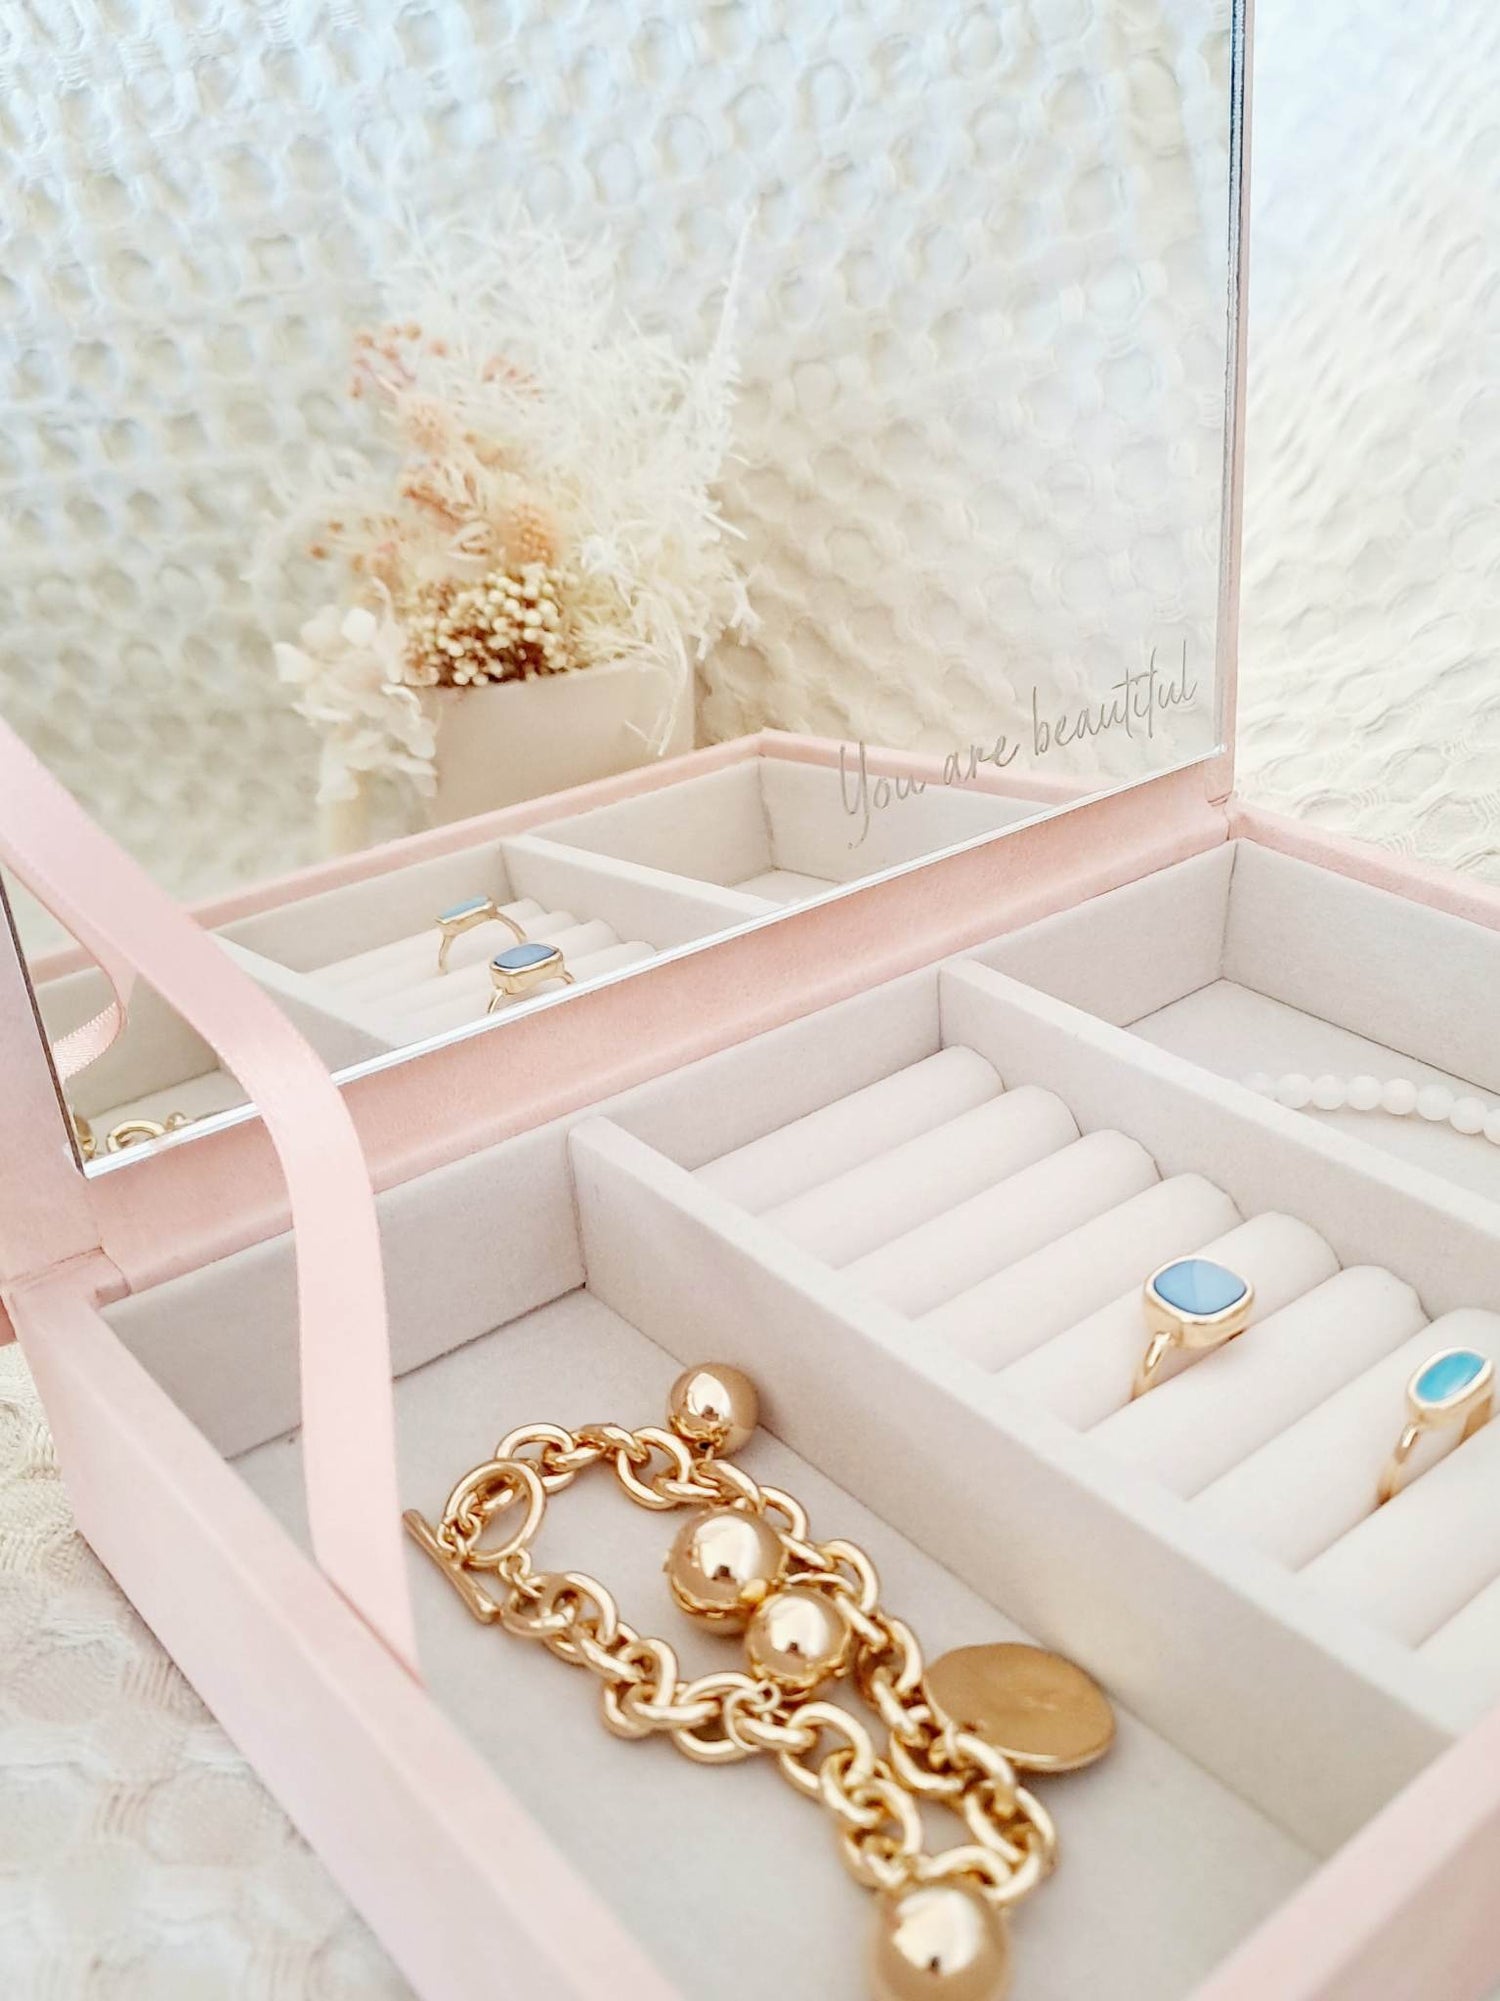 Personalised Pink Jewellery box with engraved mirror " Your are beautiful"